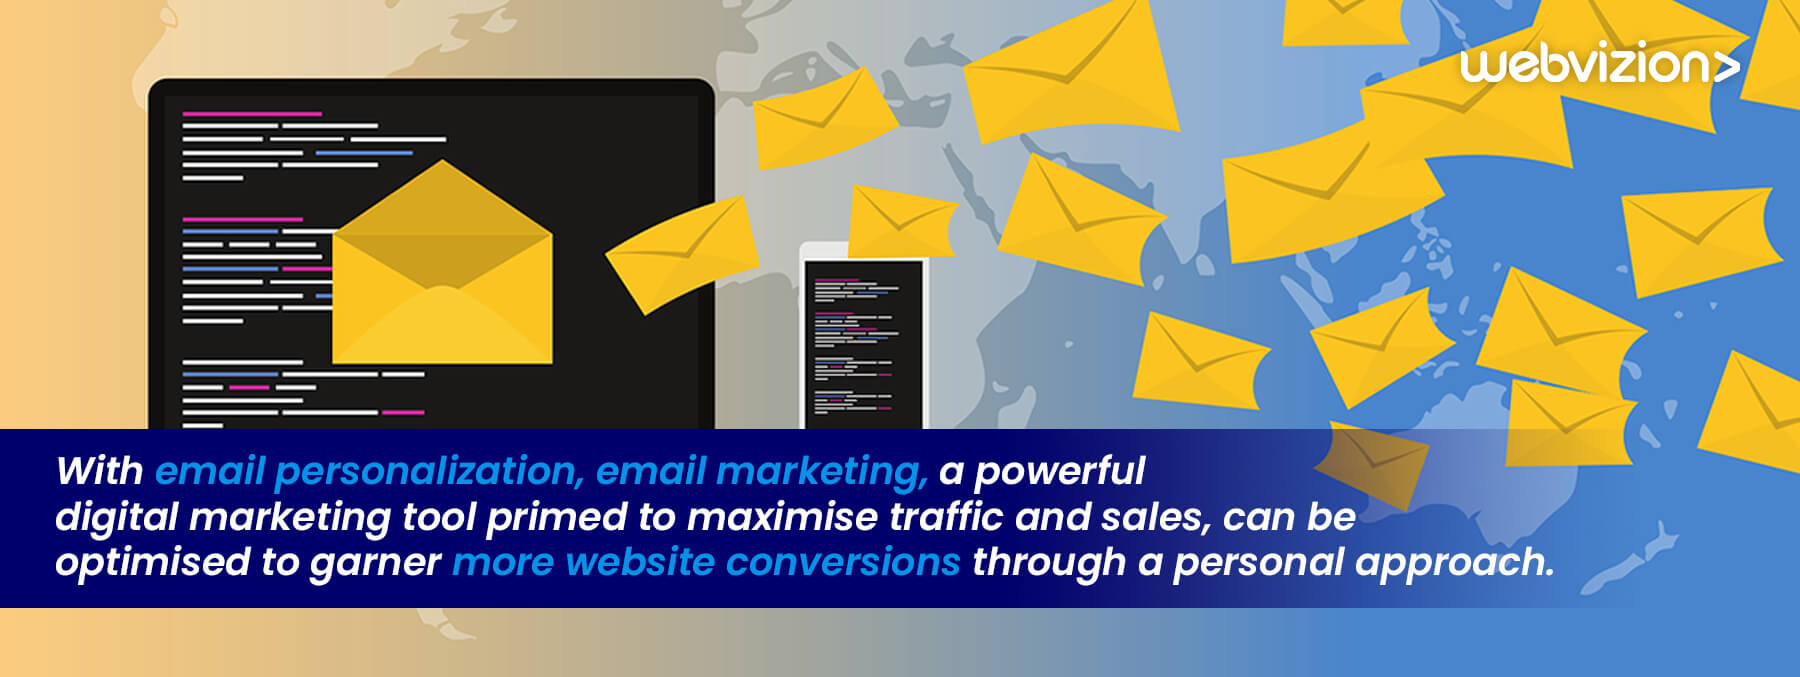 What-is-Email-Personalization-Webvizion-Global